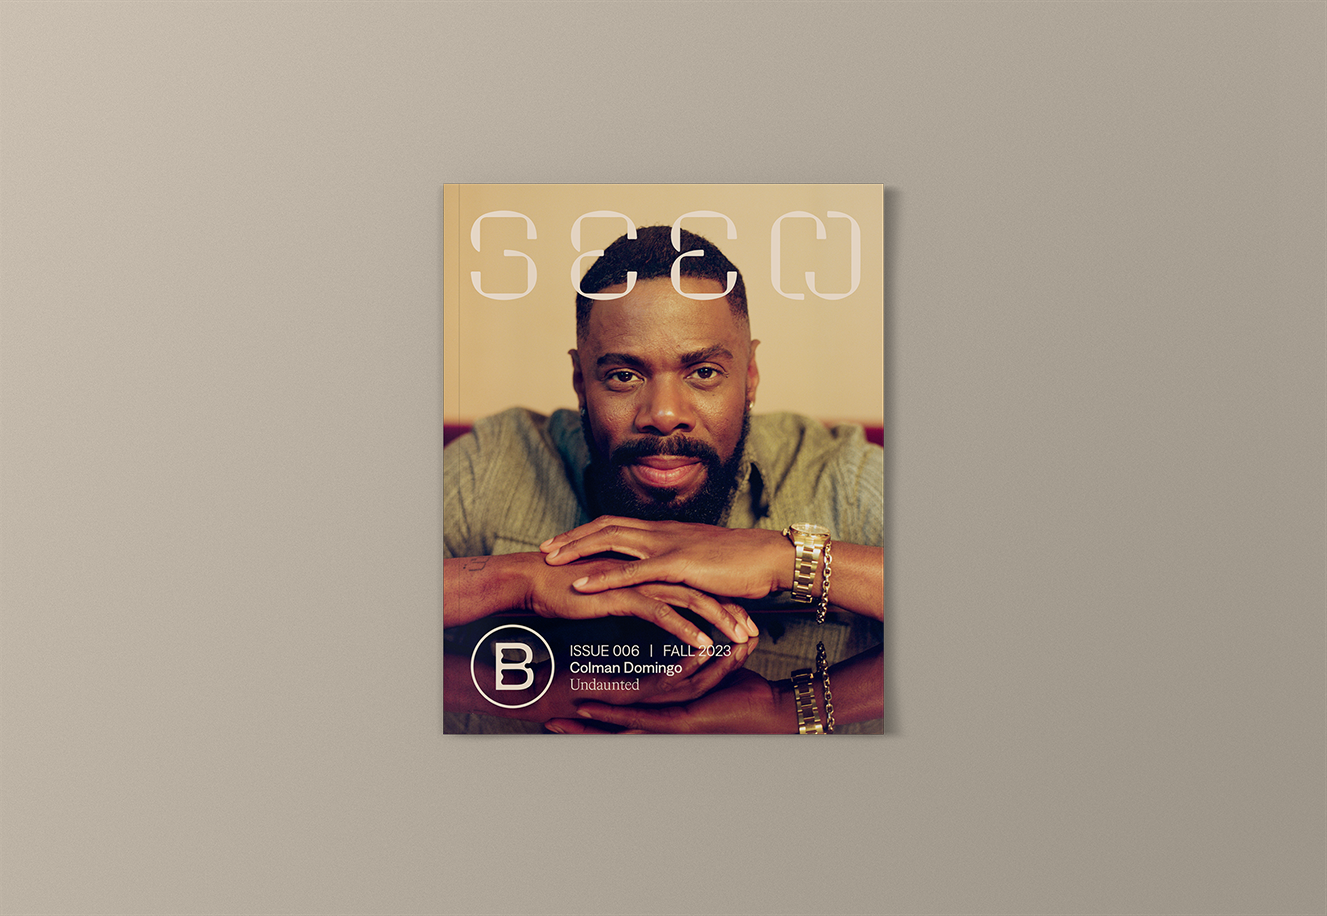 Seen Issue 006 with cover star Colman Domingo. Order and subscribe. Colman faces the camera directly, his chin rests on his hands which are crossed in front of him. He wears a gold watch and lightly colored shirt. His reflection is shown on the table upon which he rests his hands.